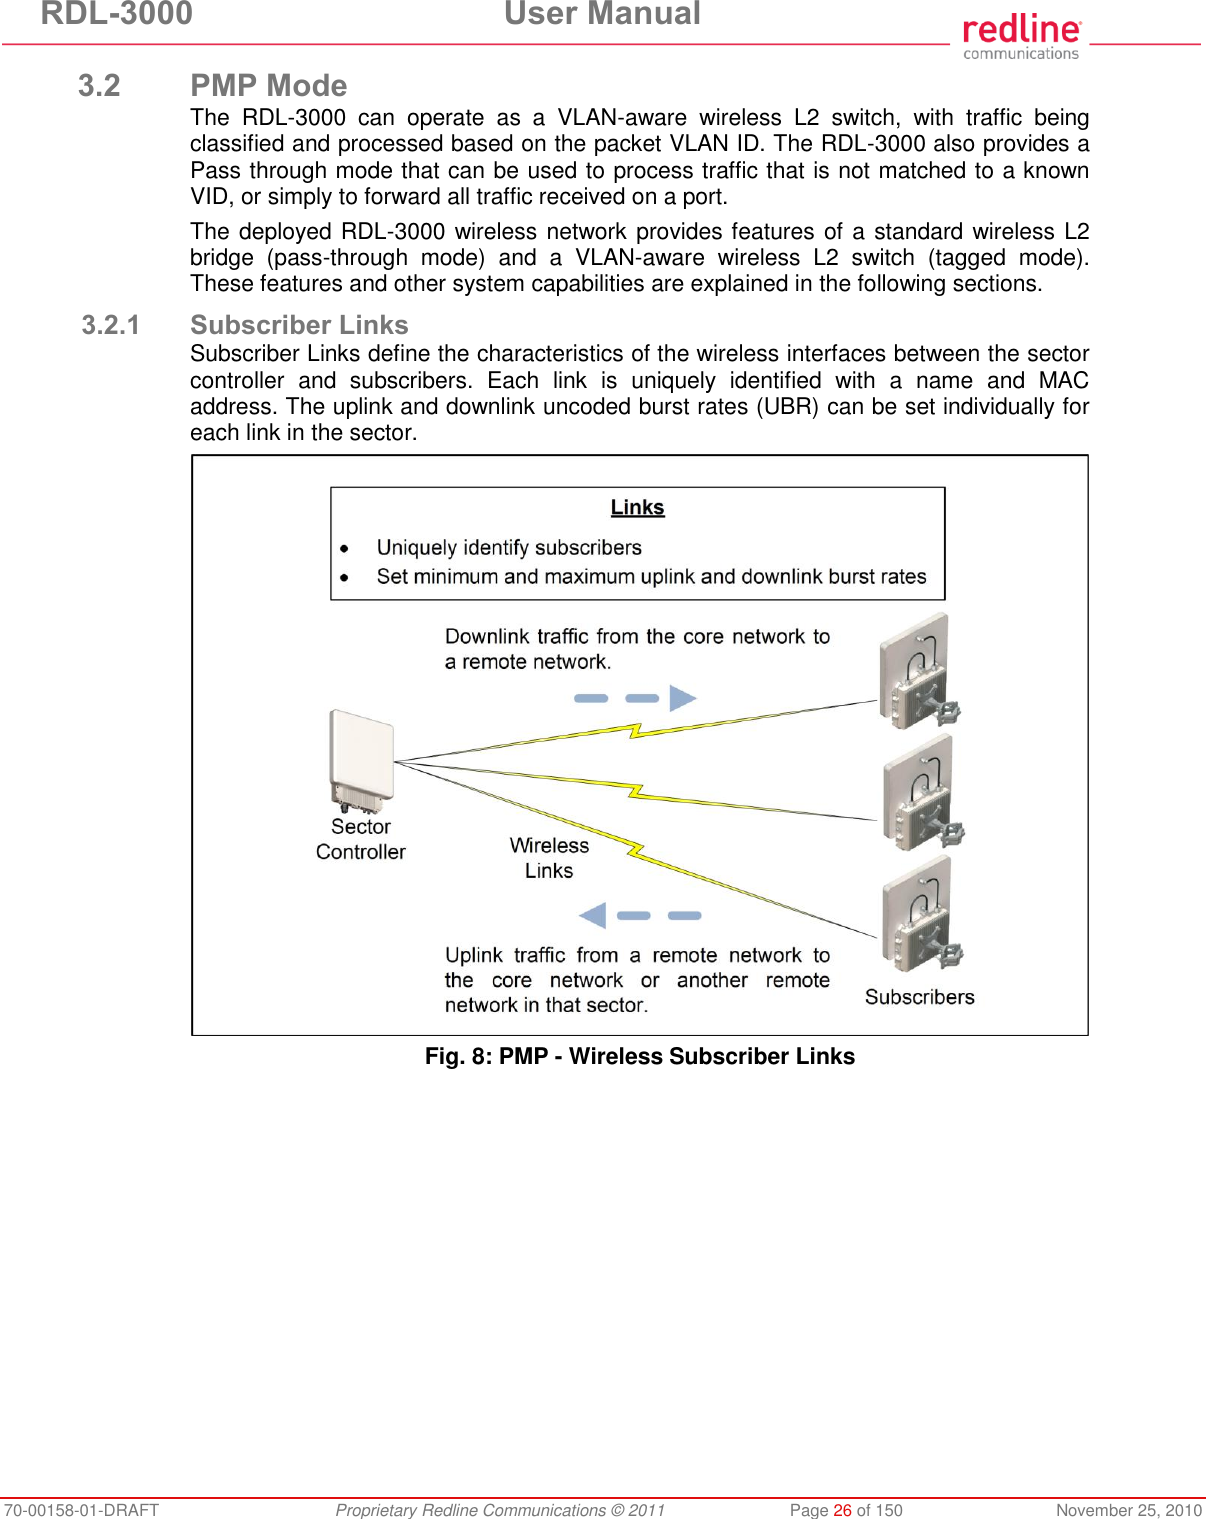 RDL-3000  User Manual 70-00158-01-DRAFT  Proprietary Redline Communications © 2011  Page 26 of 150  November 25, 2010 3.2 PMP Mode The  RDL-3000  can  operate  as  a  VLAN-aware  wireless  L2  switch,  with  traffic  being classified and processed based on the packet VLAN ID. The RDL-3000 also provides a Pass through mode that can be used to process traffic that is not matched to a known VID, or simply to forward all traffic received on a port.  The deployed RDL-3000 wireless network provides features of a standard wireless L2 bridge  (pass-through  mode)  and  a  VLAN-aware  wireless  L2  switch  (tagged  mode). These features and other system capabilities are explained in the following sections. 3.2.1 Subscriber Links Subscriber Links define the characteristics of the wireless interfaces between the sector controller  and  subscribers.  Each  link  is  uniquely  identified  with  a  name  and  MAC address. The uplink and downlink uncoded burst rates (UBR) can be set individually for each link in the sector.  Fig. 8: PMP - Wireless Subscriber Links 